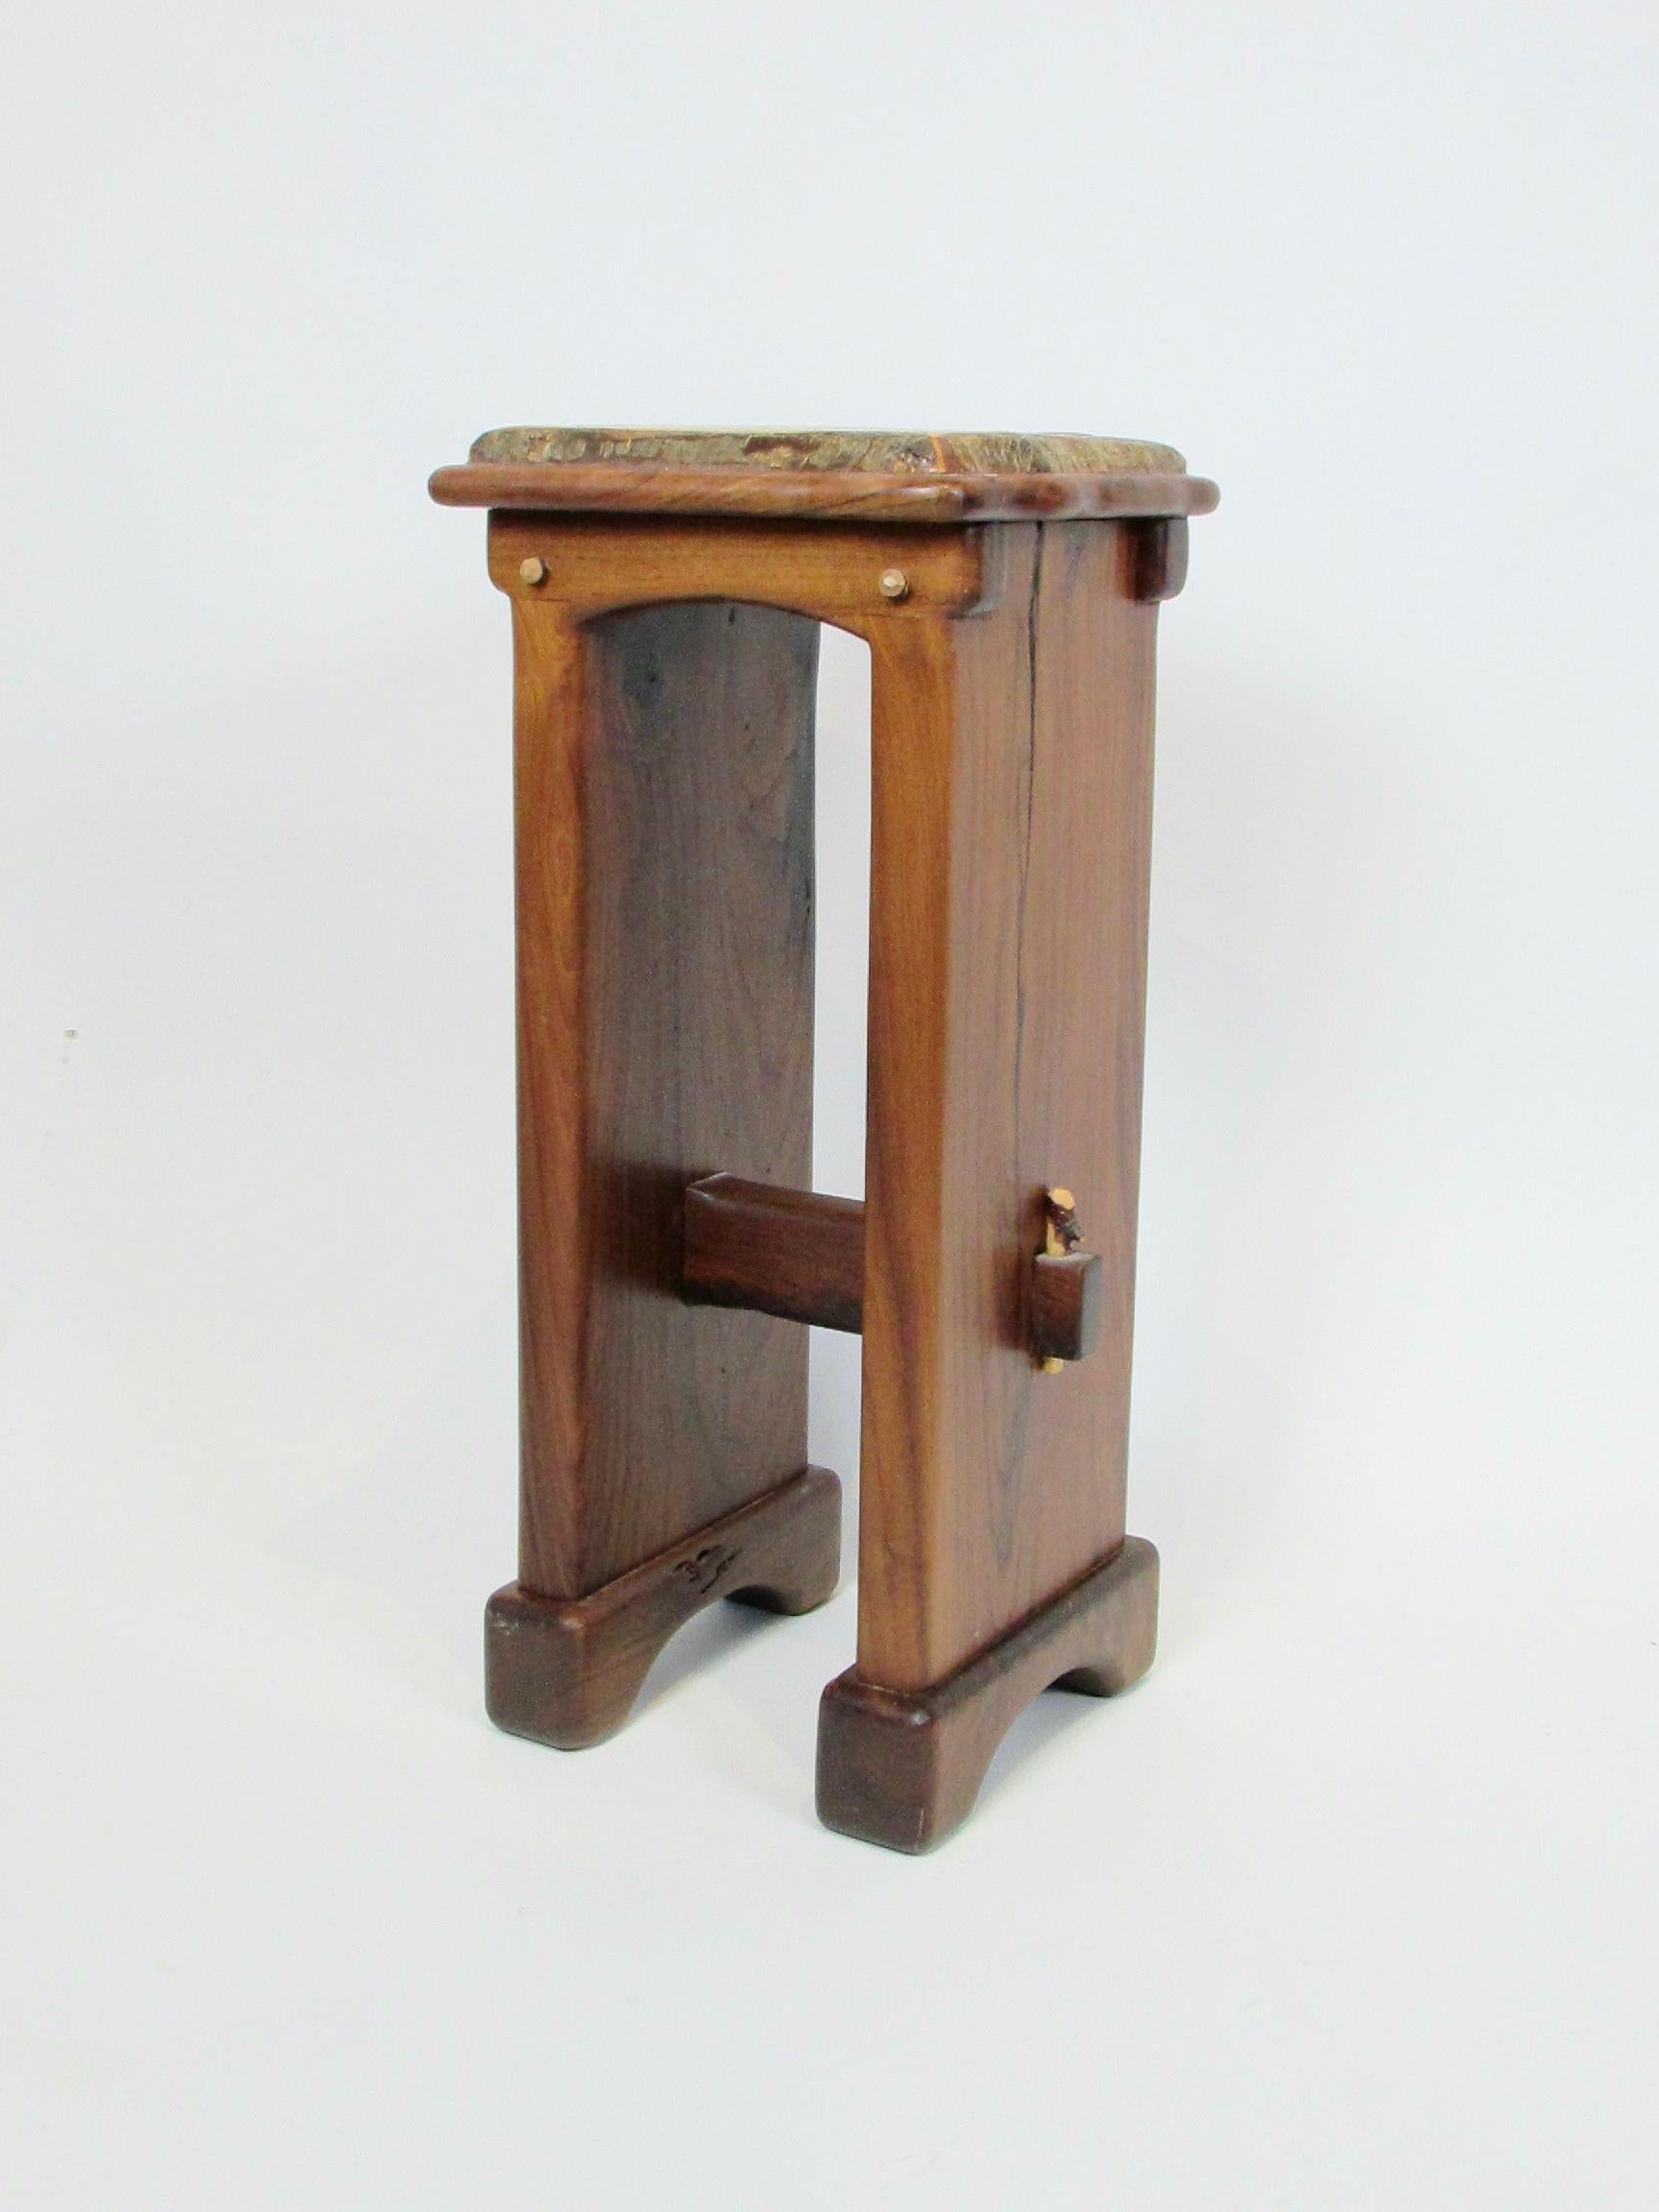 Solid walnut plant stand in craftsman studio style. Thick walnut sides with stretcher tenoned through each side natural twig type dowel inserted on the outboard side. Natural free edge style top.